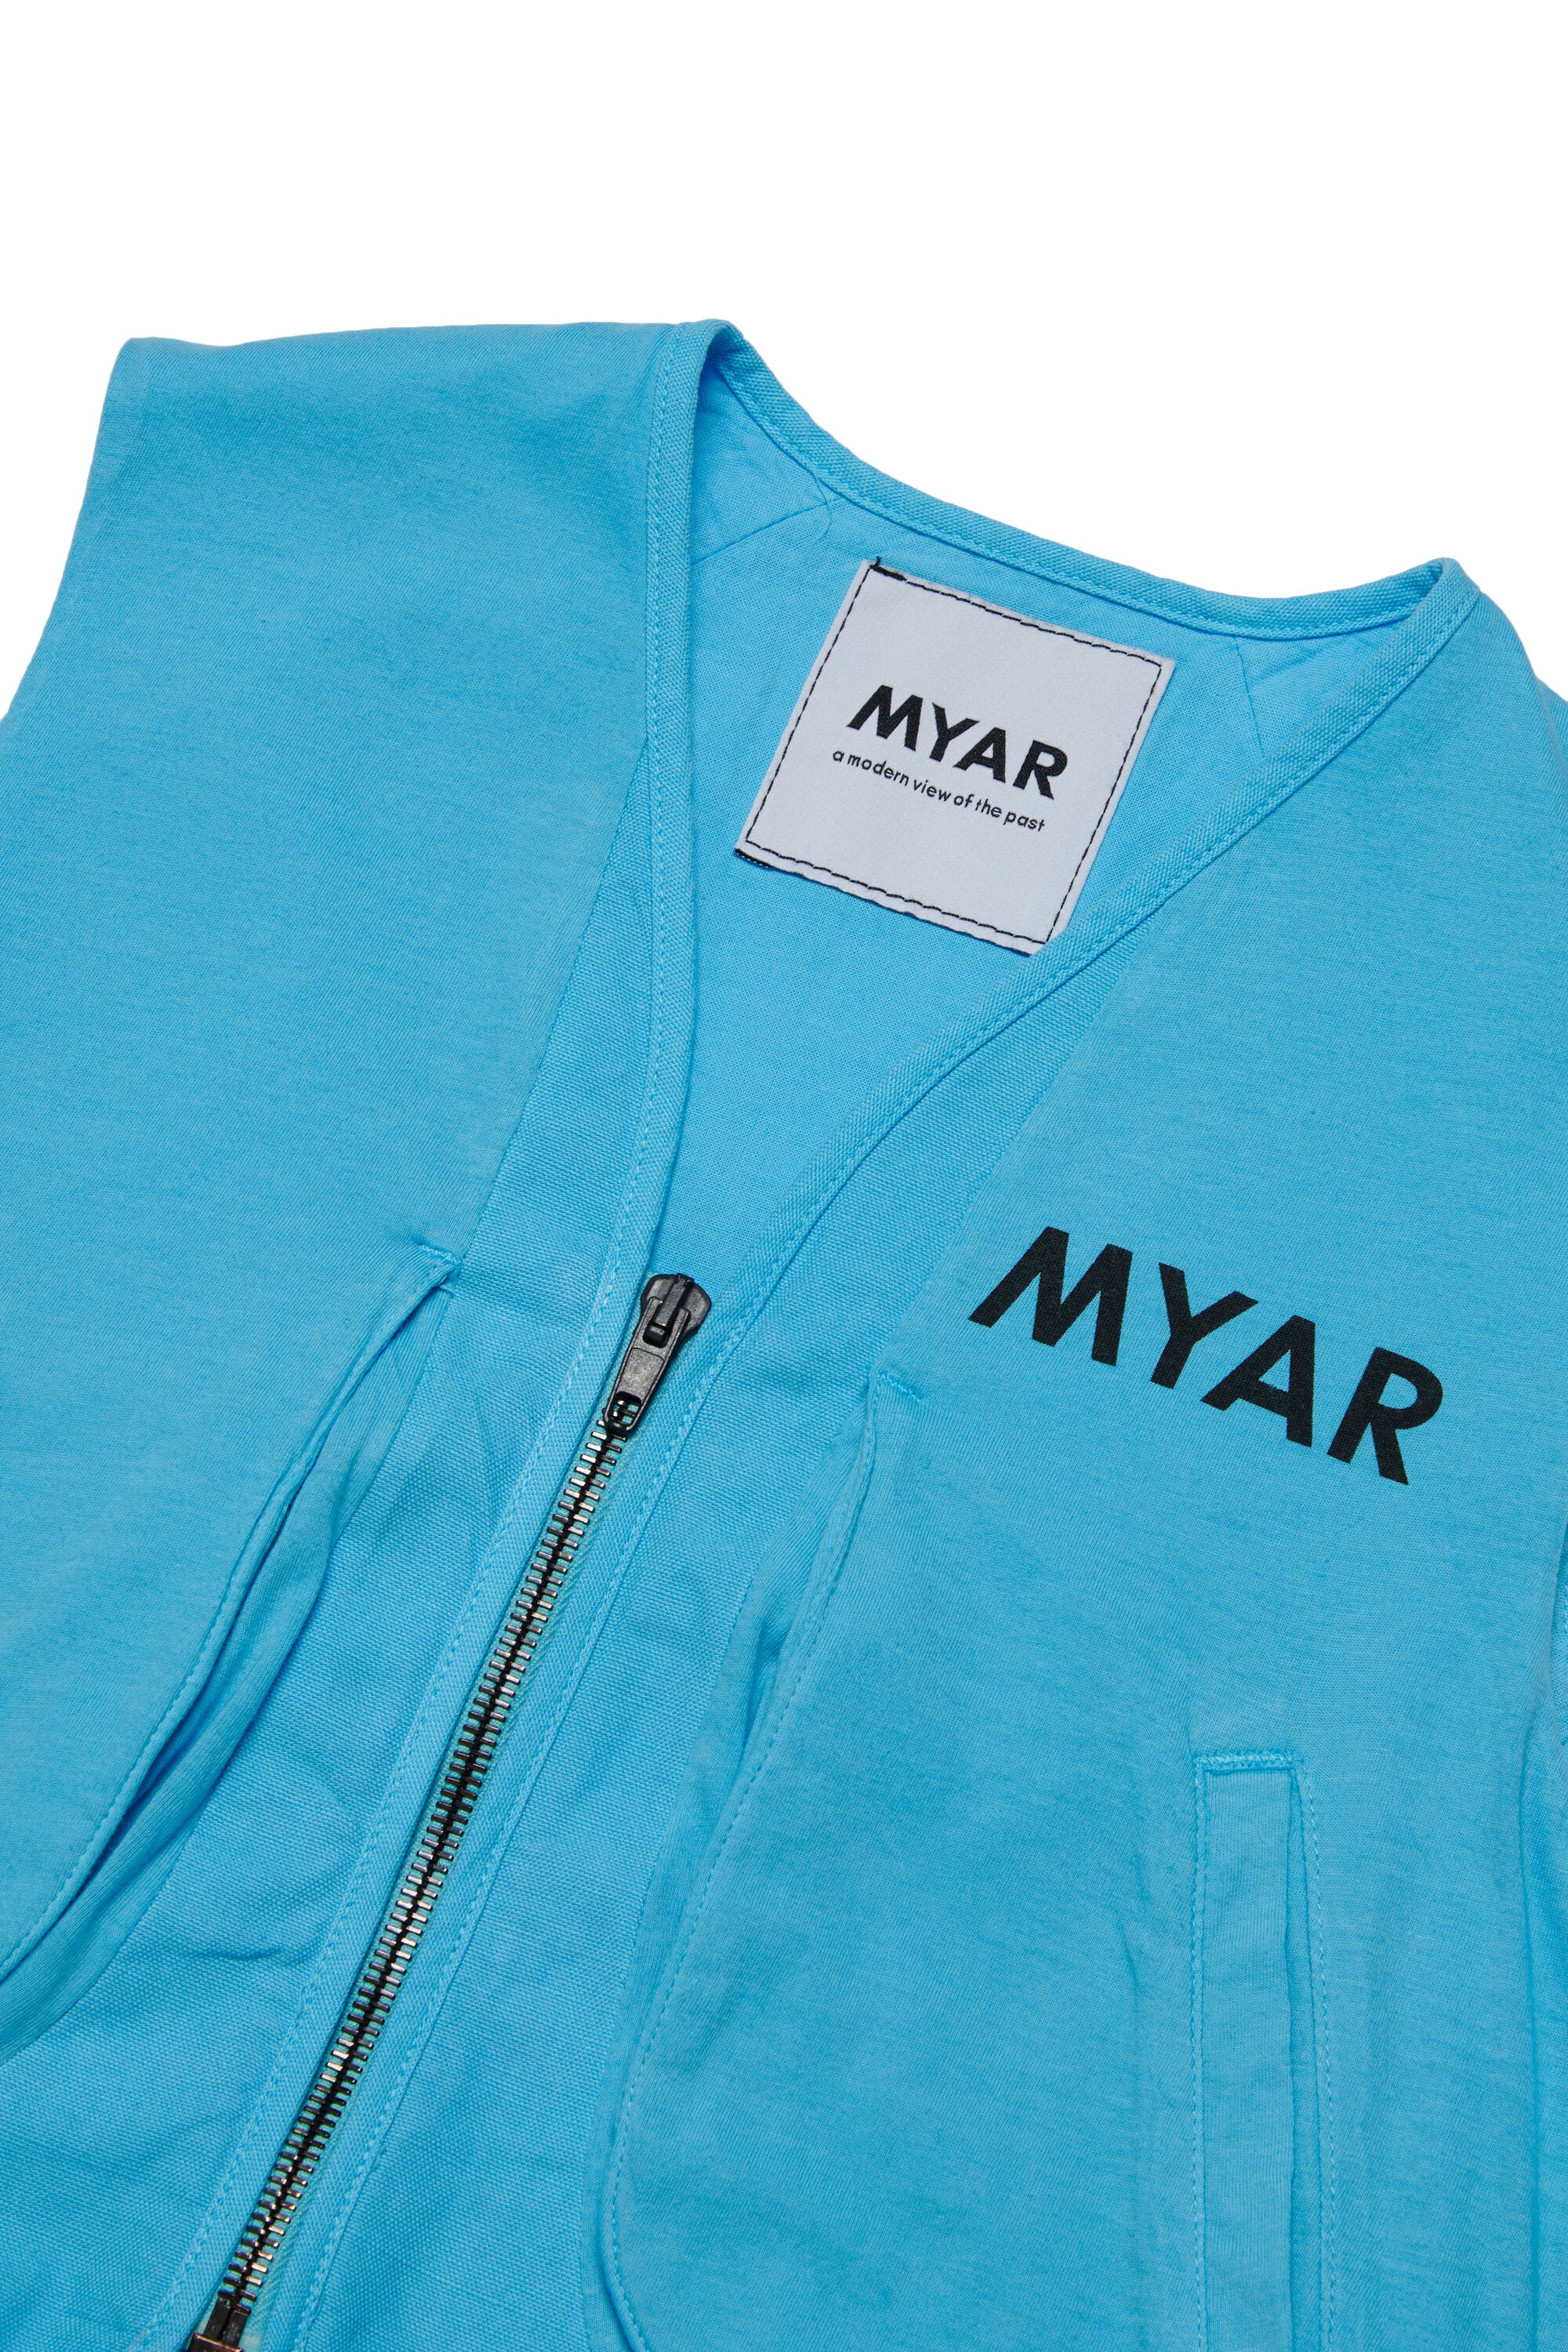 Vest jacket in deadstock and linen with MYAR logo